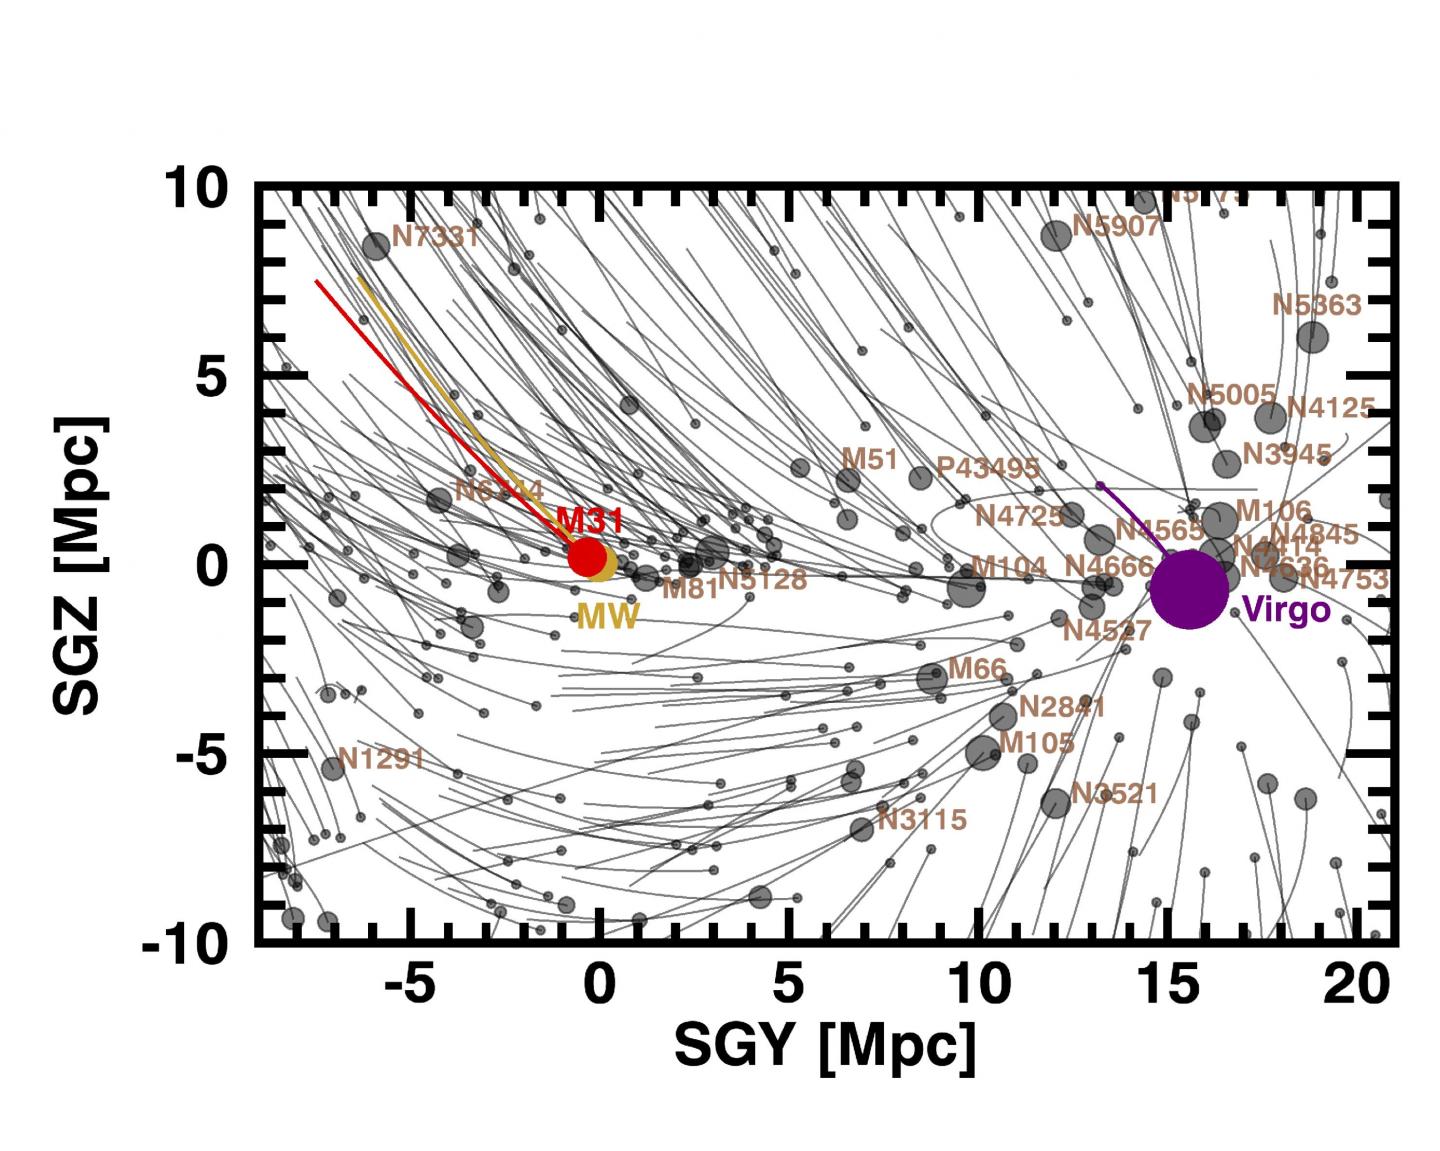 Orbits of galaxies in the Local Supercluster